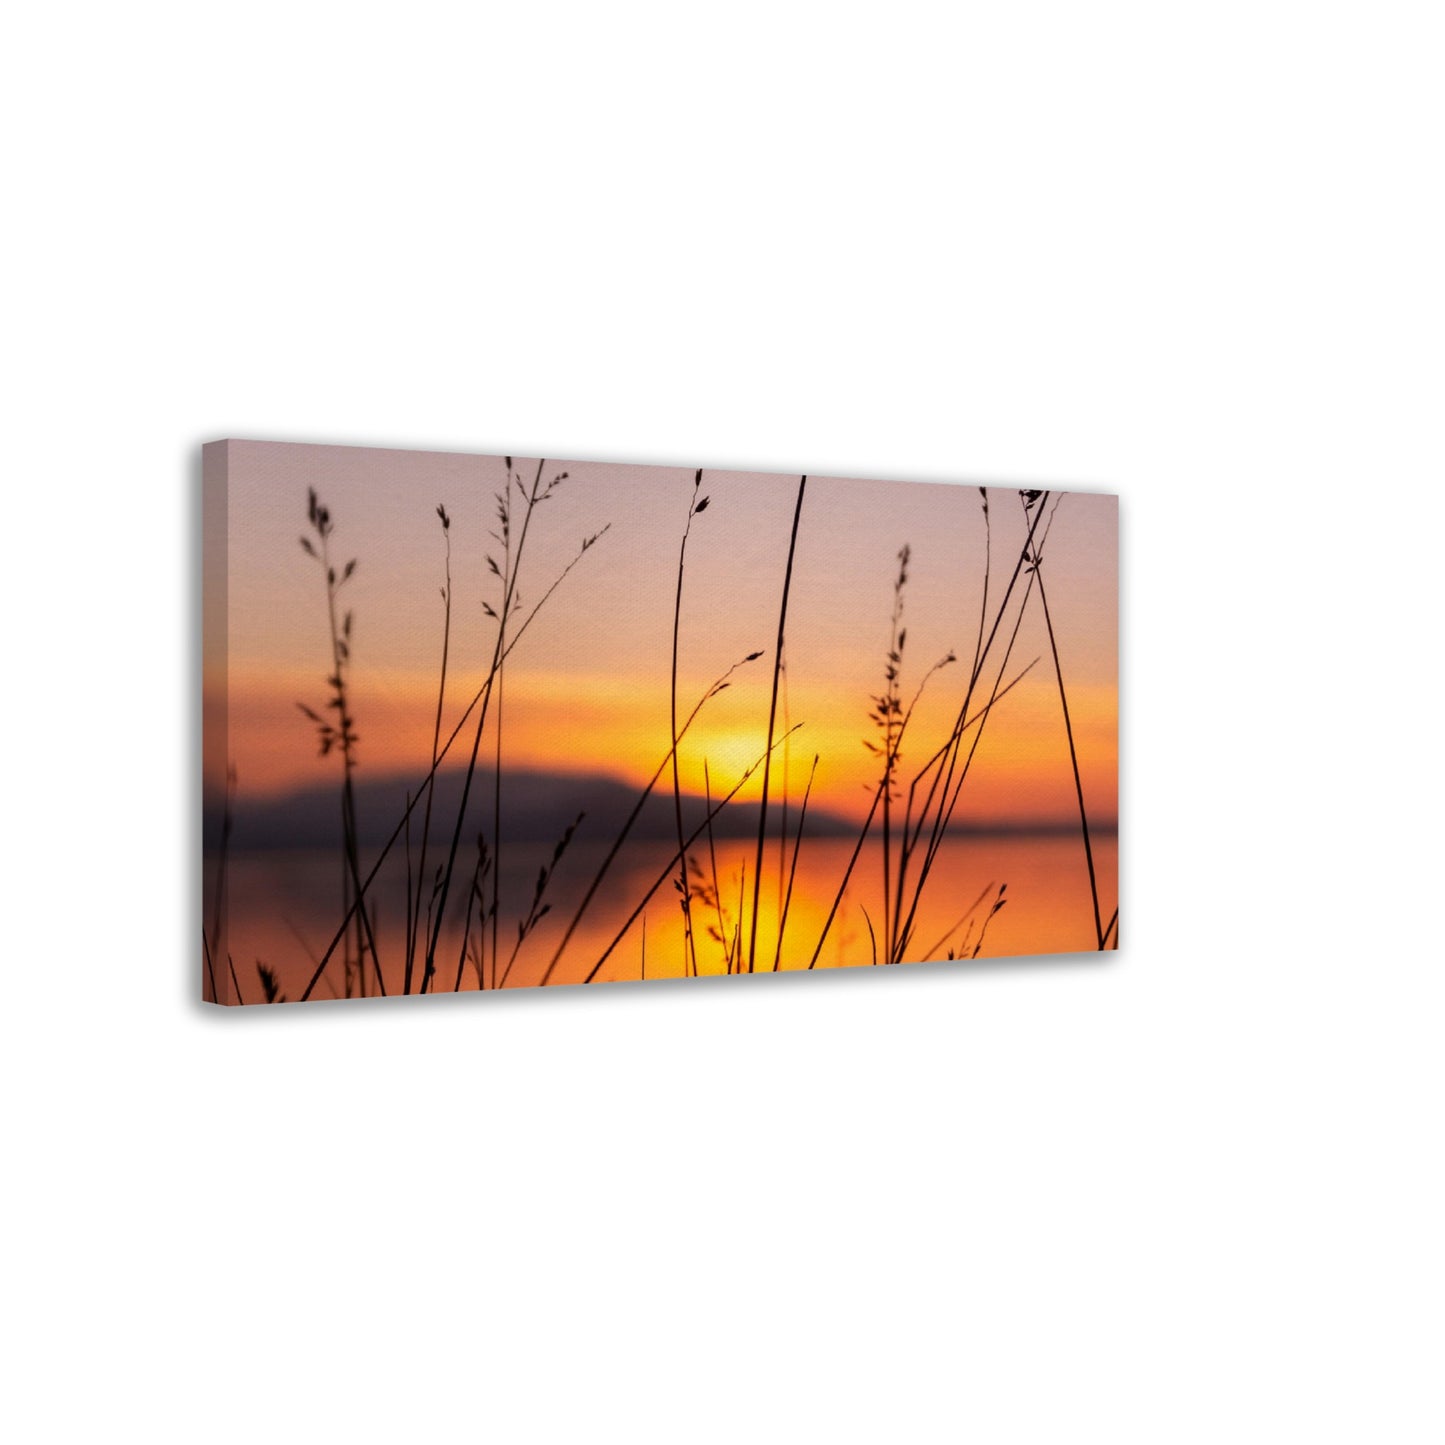 Sunset at the Lake - Artistic Canvas Print